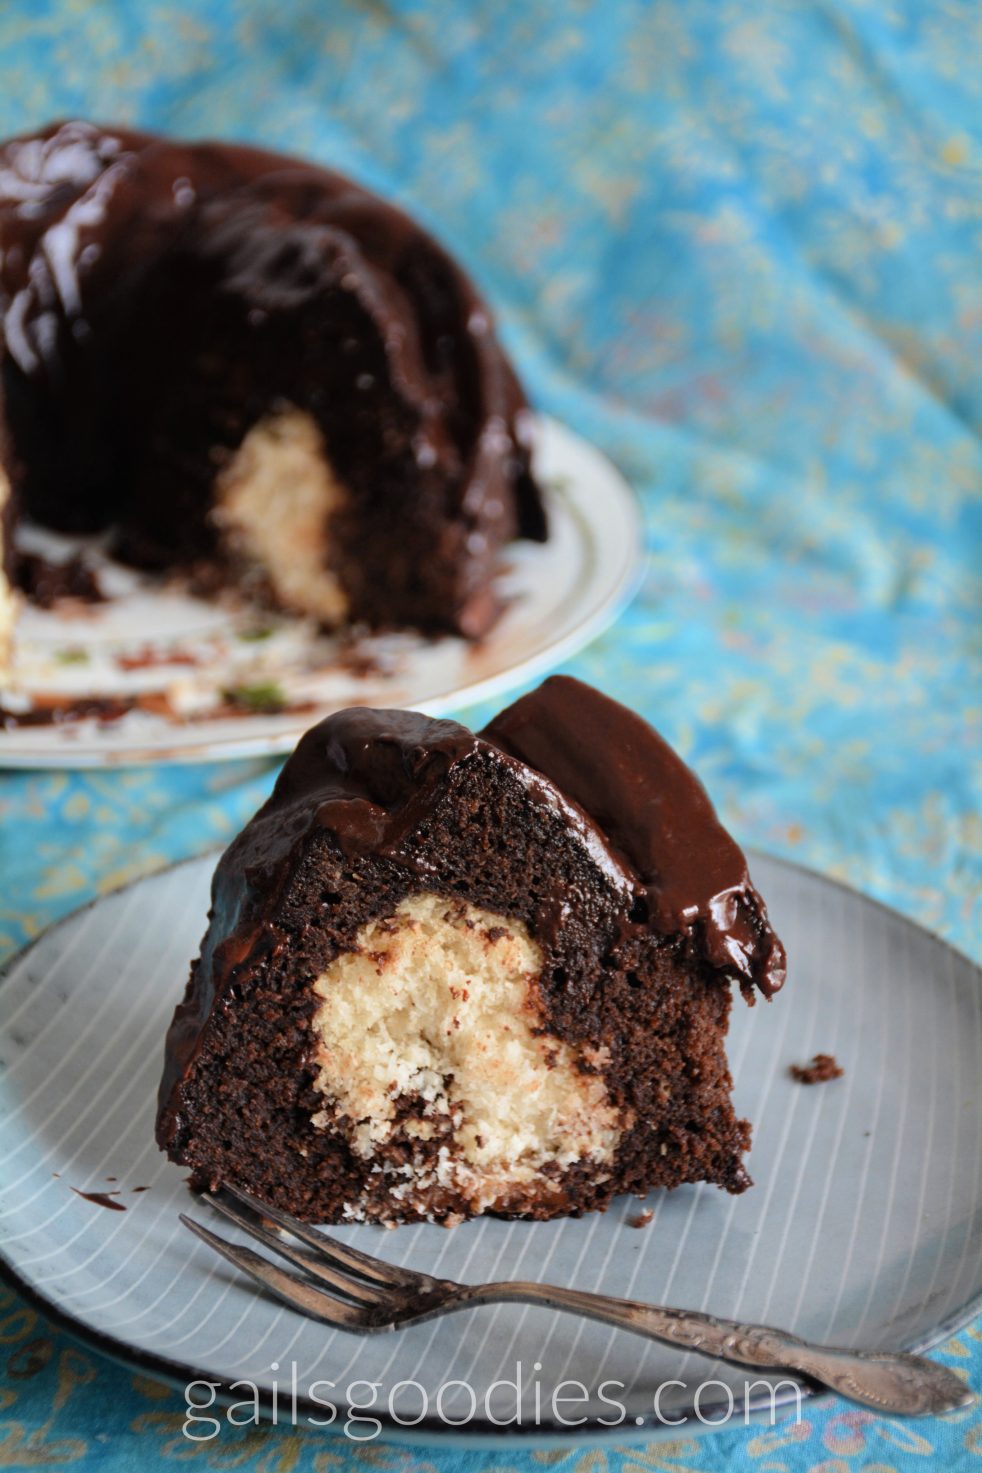 A slice of chocolate fudge macaroon bundt cake stits on a grey plate with white strips. cream colored macaroon filling is surroundd by moist, dark chocolate cake. The slice is covered with a generous amount of fark chocolate ganache. In the background on the left side of the photo, the rest of the cake sits on a white plate.